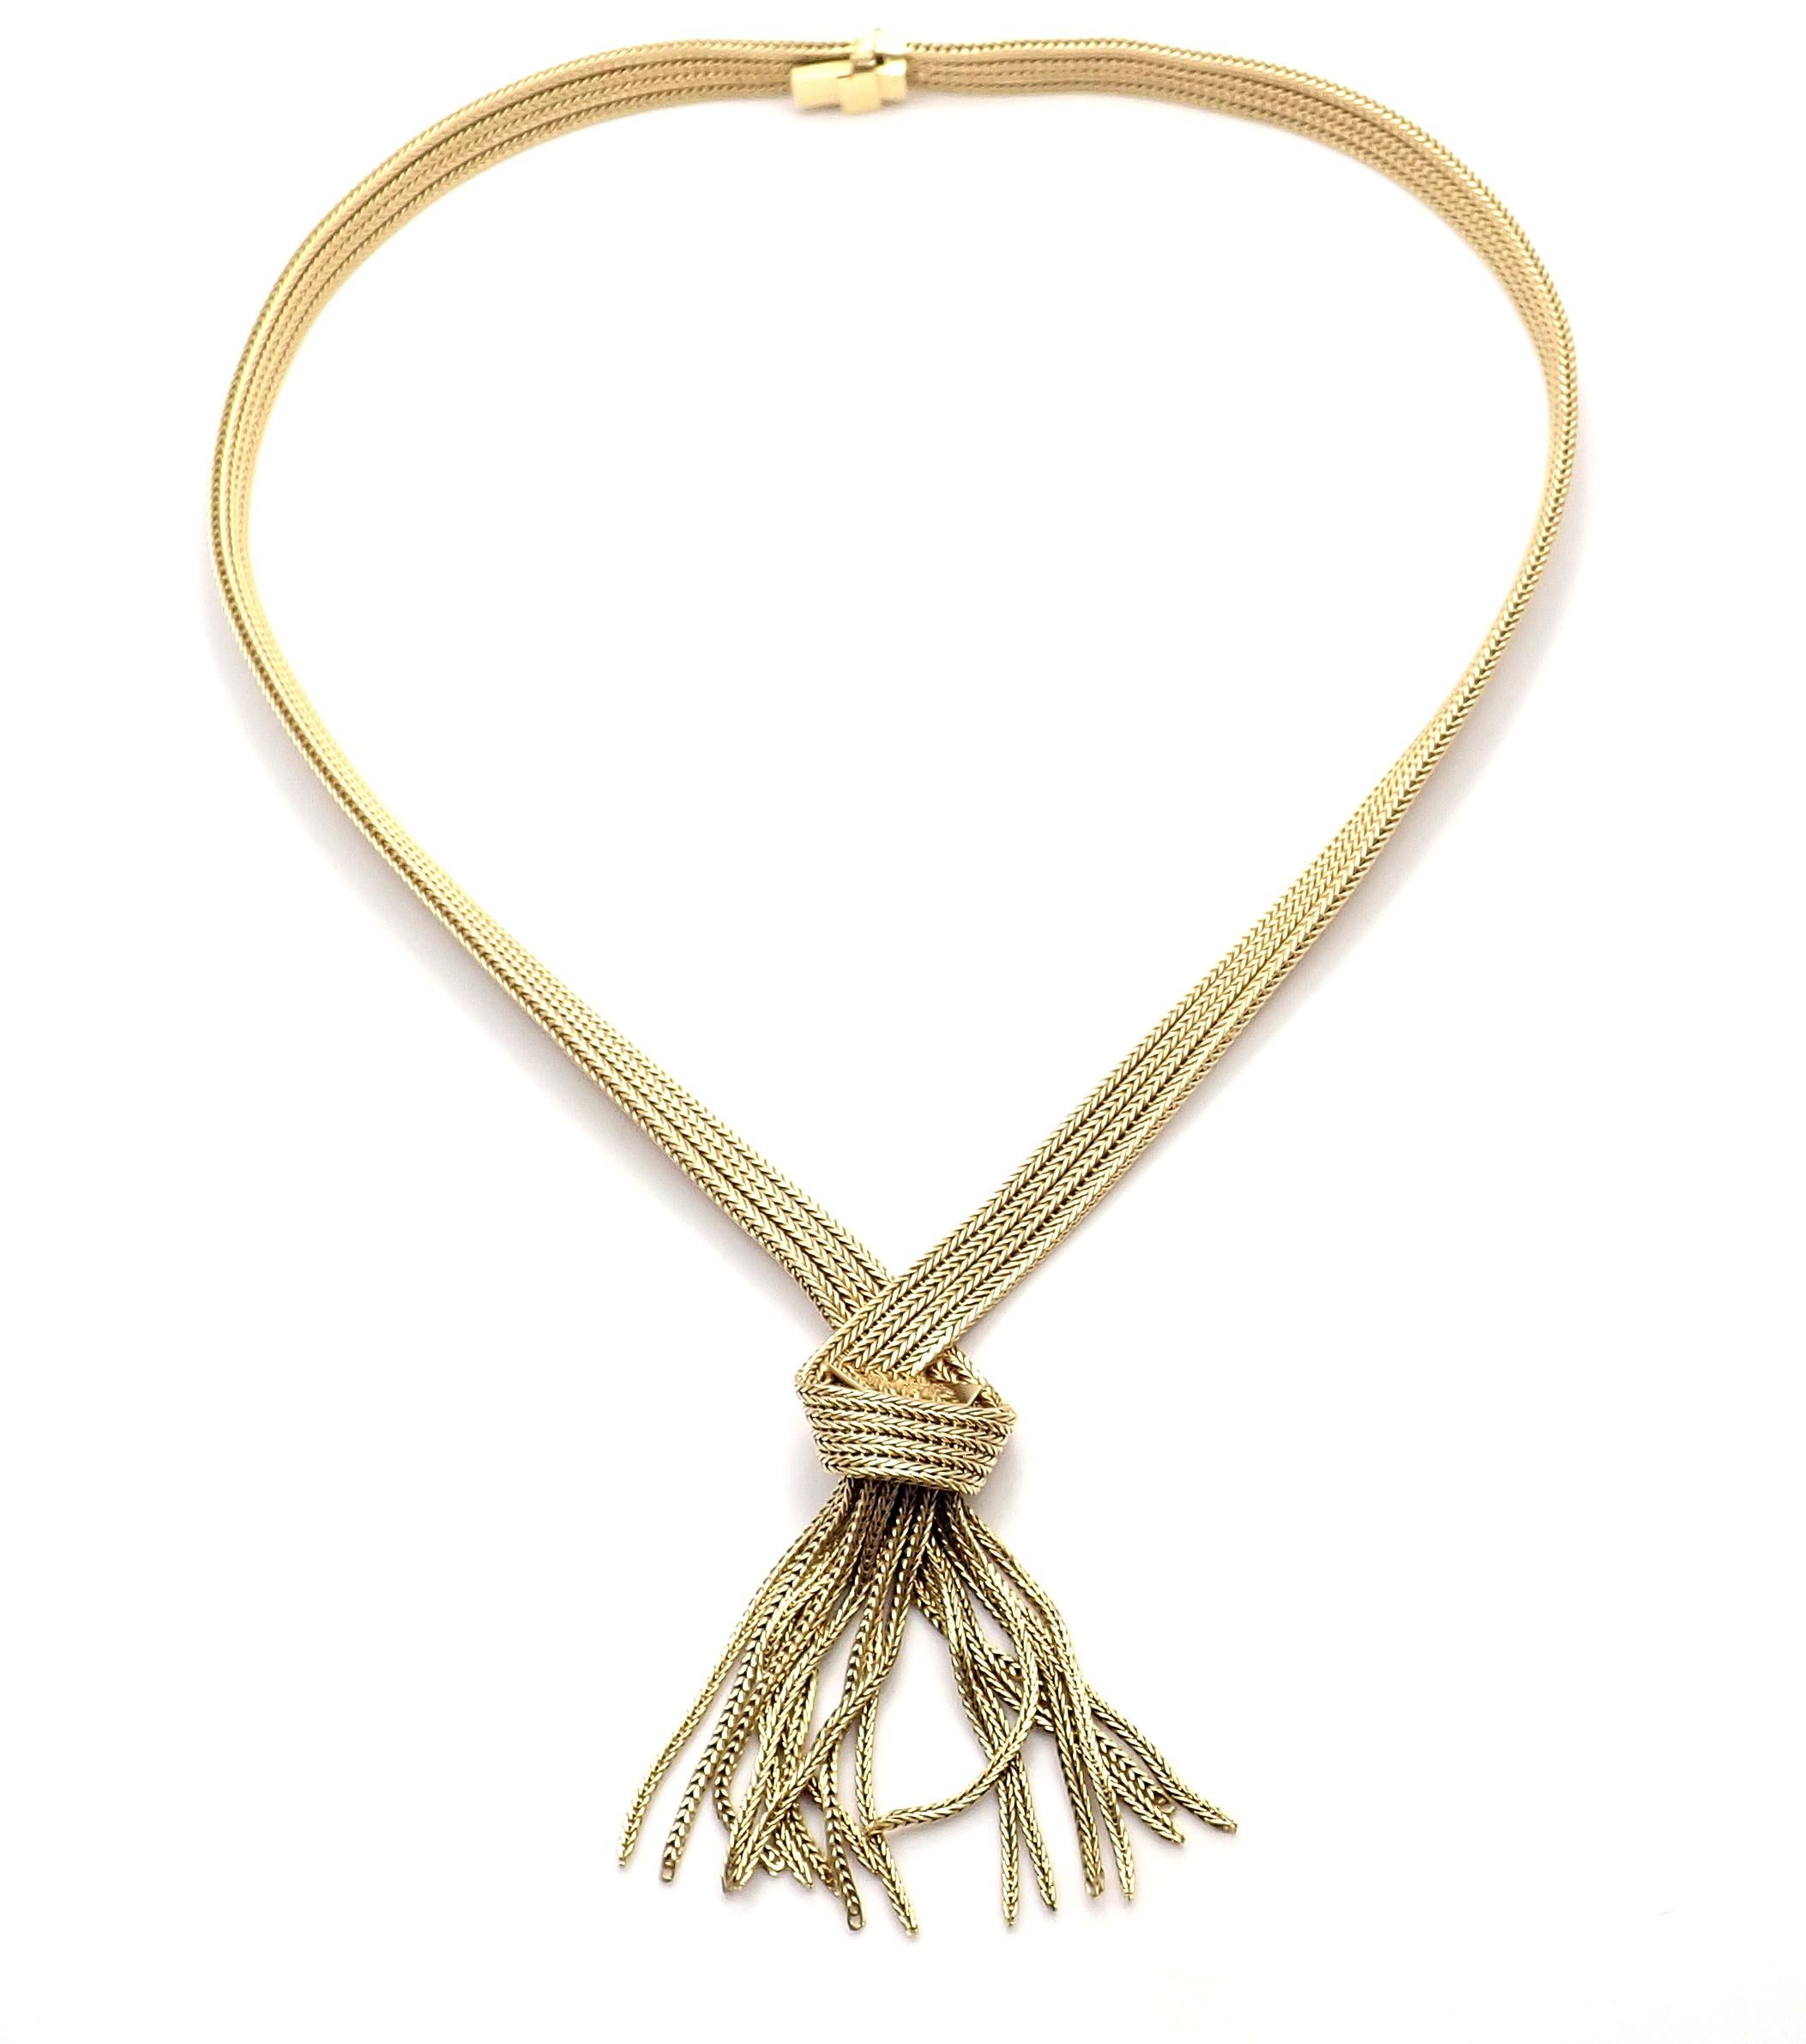 18k Yellow Gold Vintage Tassel Solid Yellow Gold Necklace by Grosse Germany circa 1962.
Details: 
Weight: 63.2 grams
Chain Length 16.5